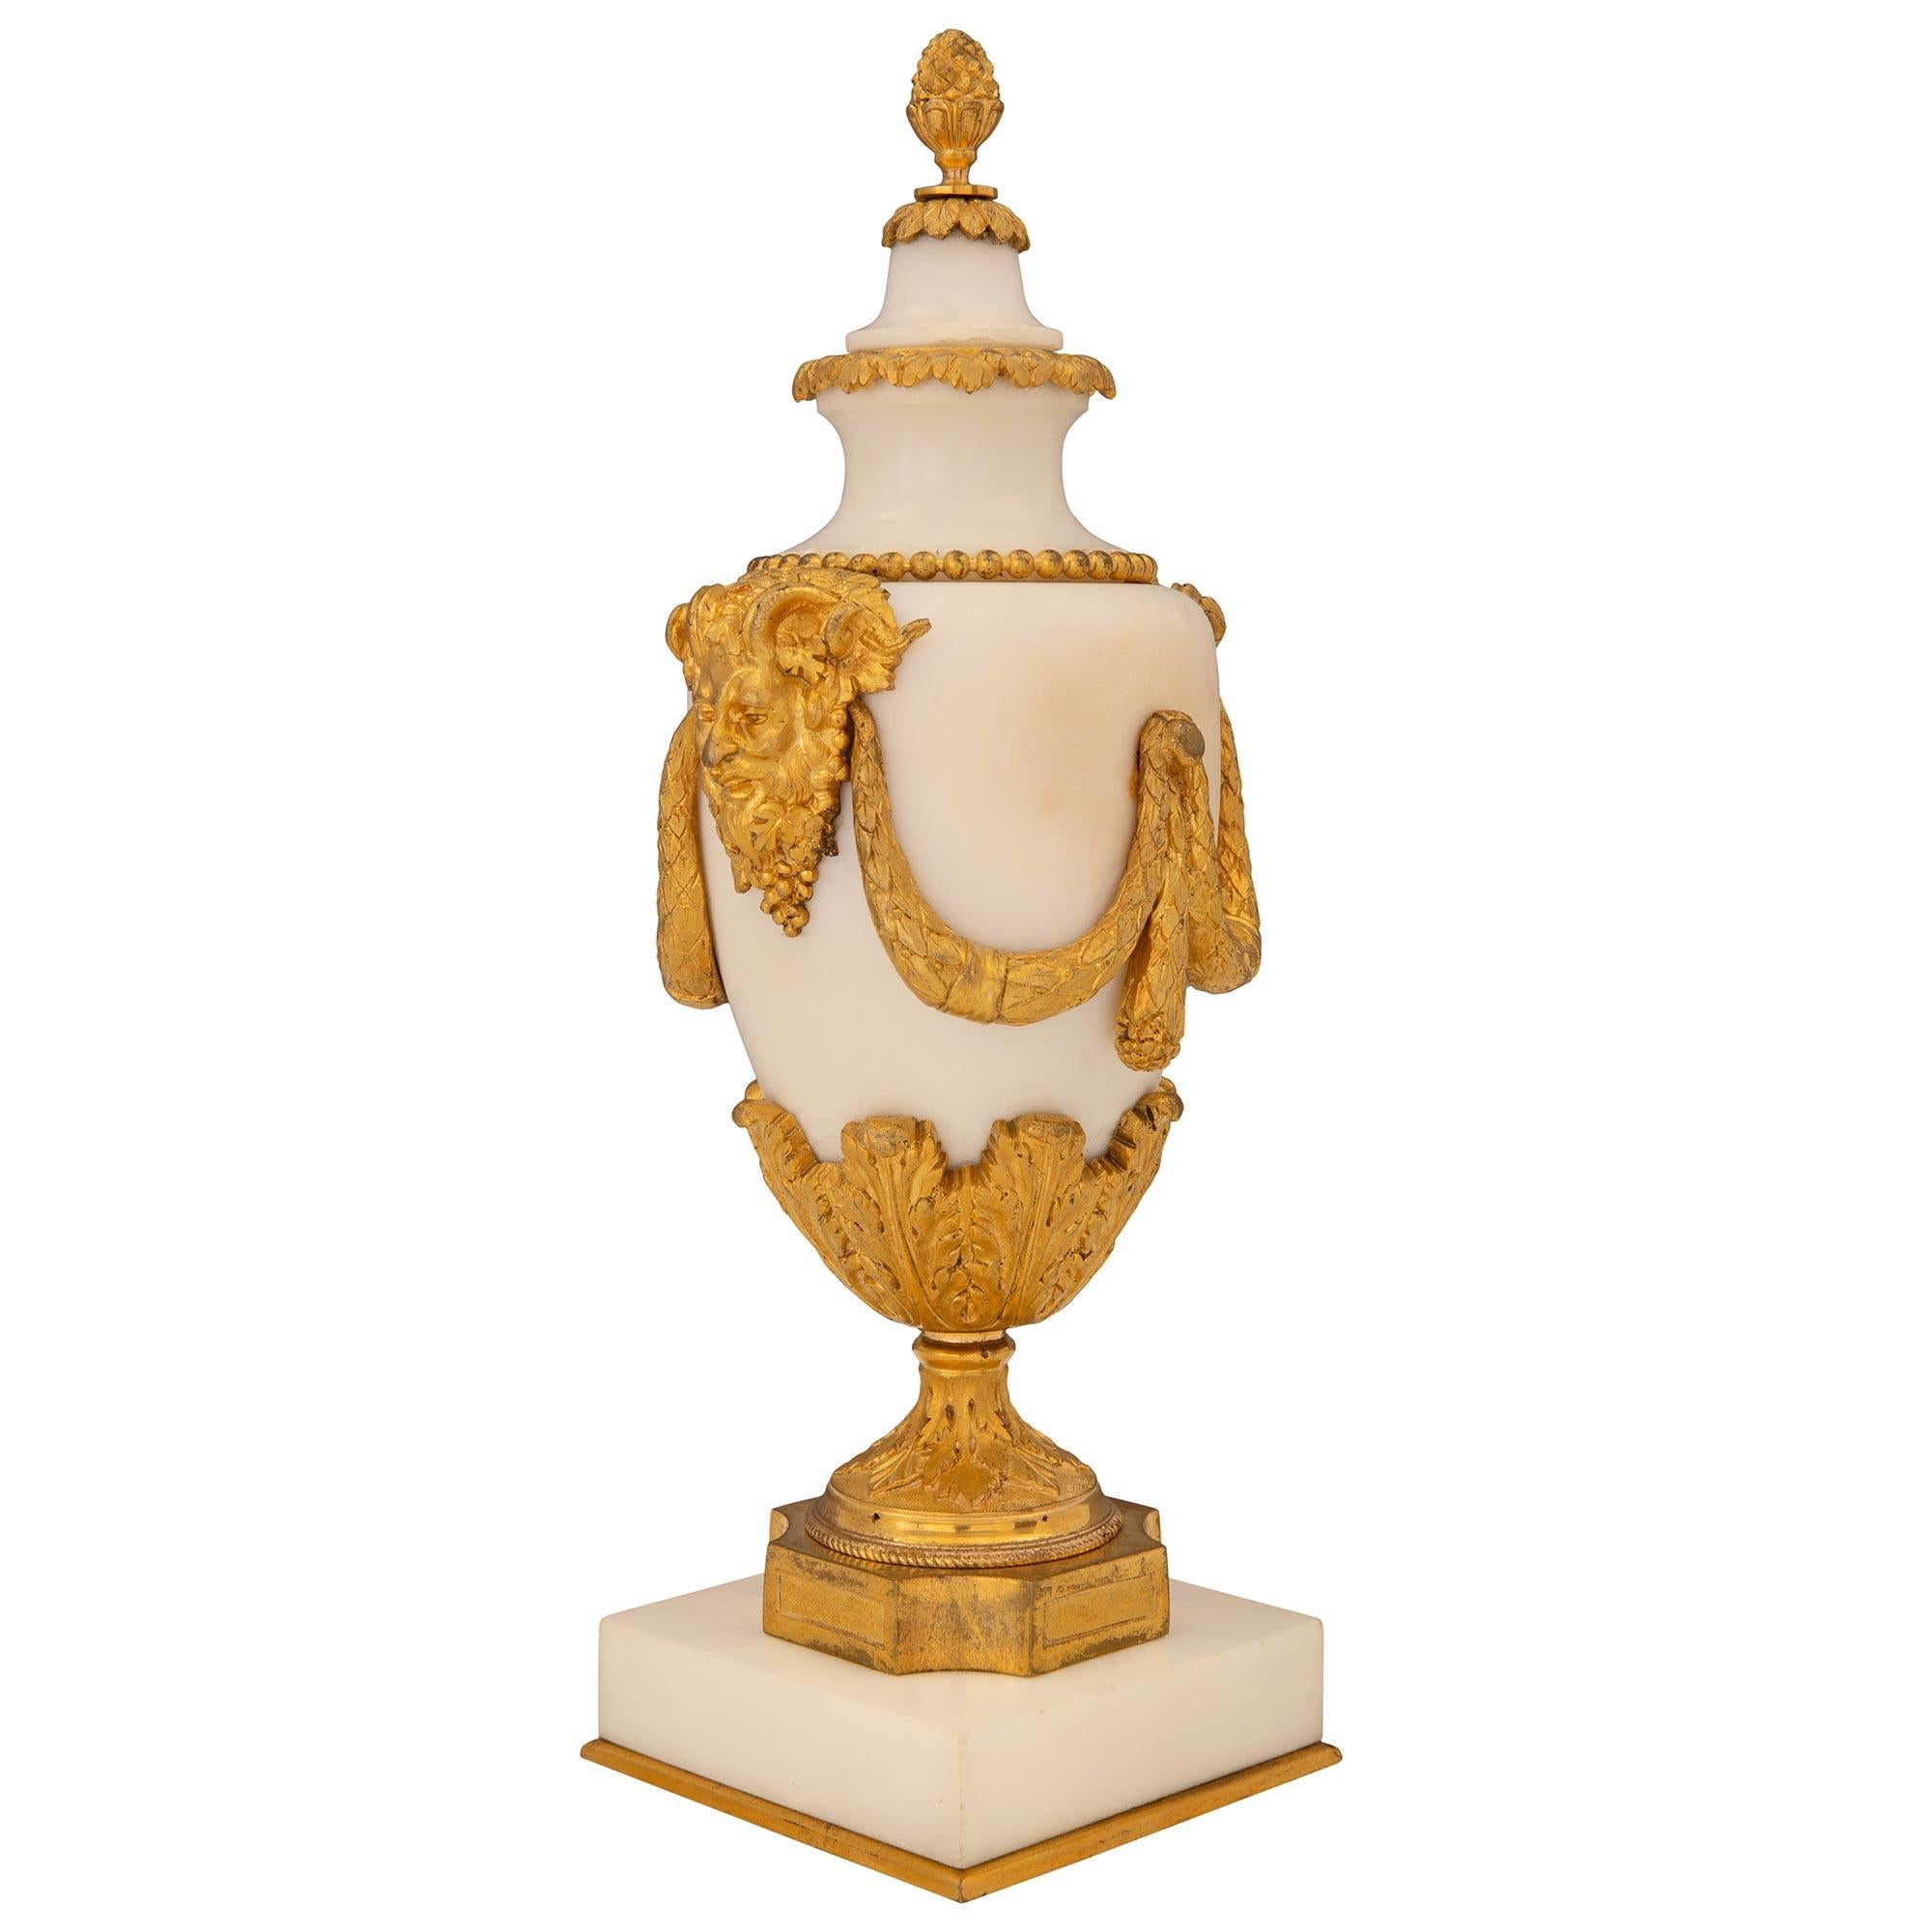 An elegant pair of French 19th century Louis XVI st. white Carrara marble and ormolu lidded cassolette urns. Each cassolette is raised by a square white Carrara marble base with a fine bottom ormolu fillet. The ormolu socle shaped pedestal supports